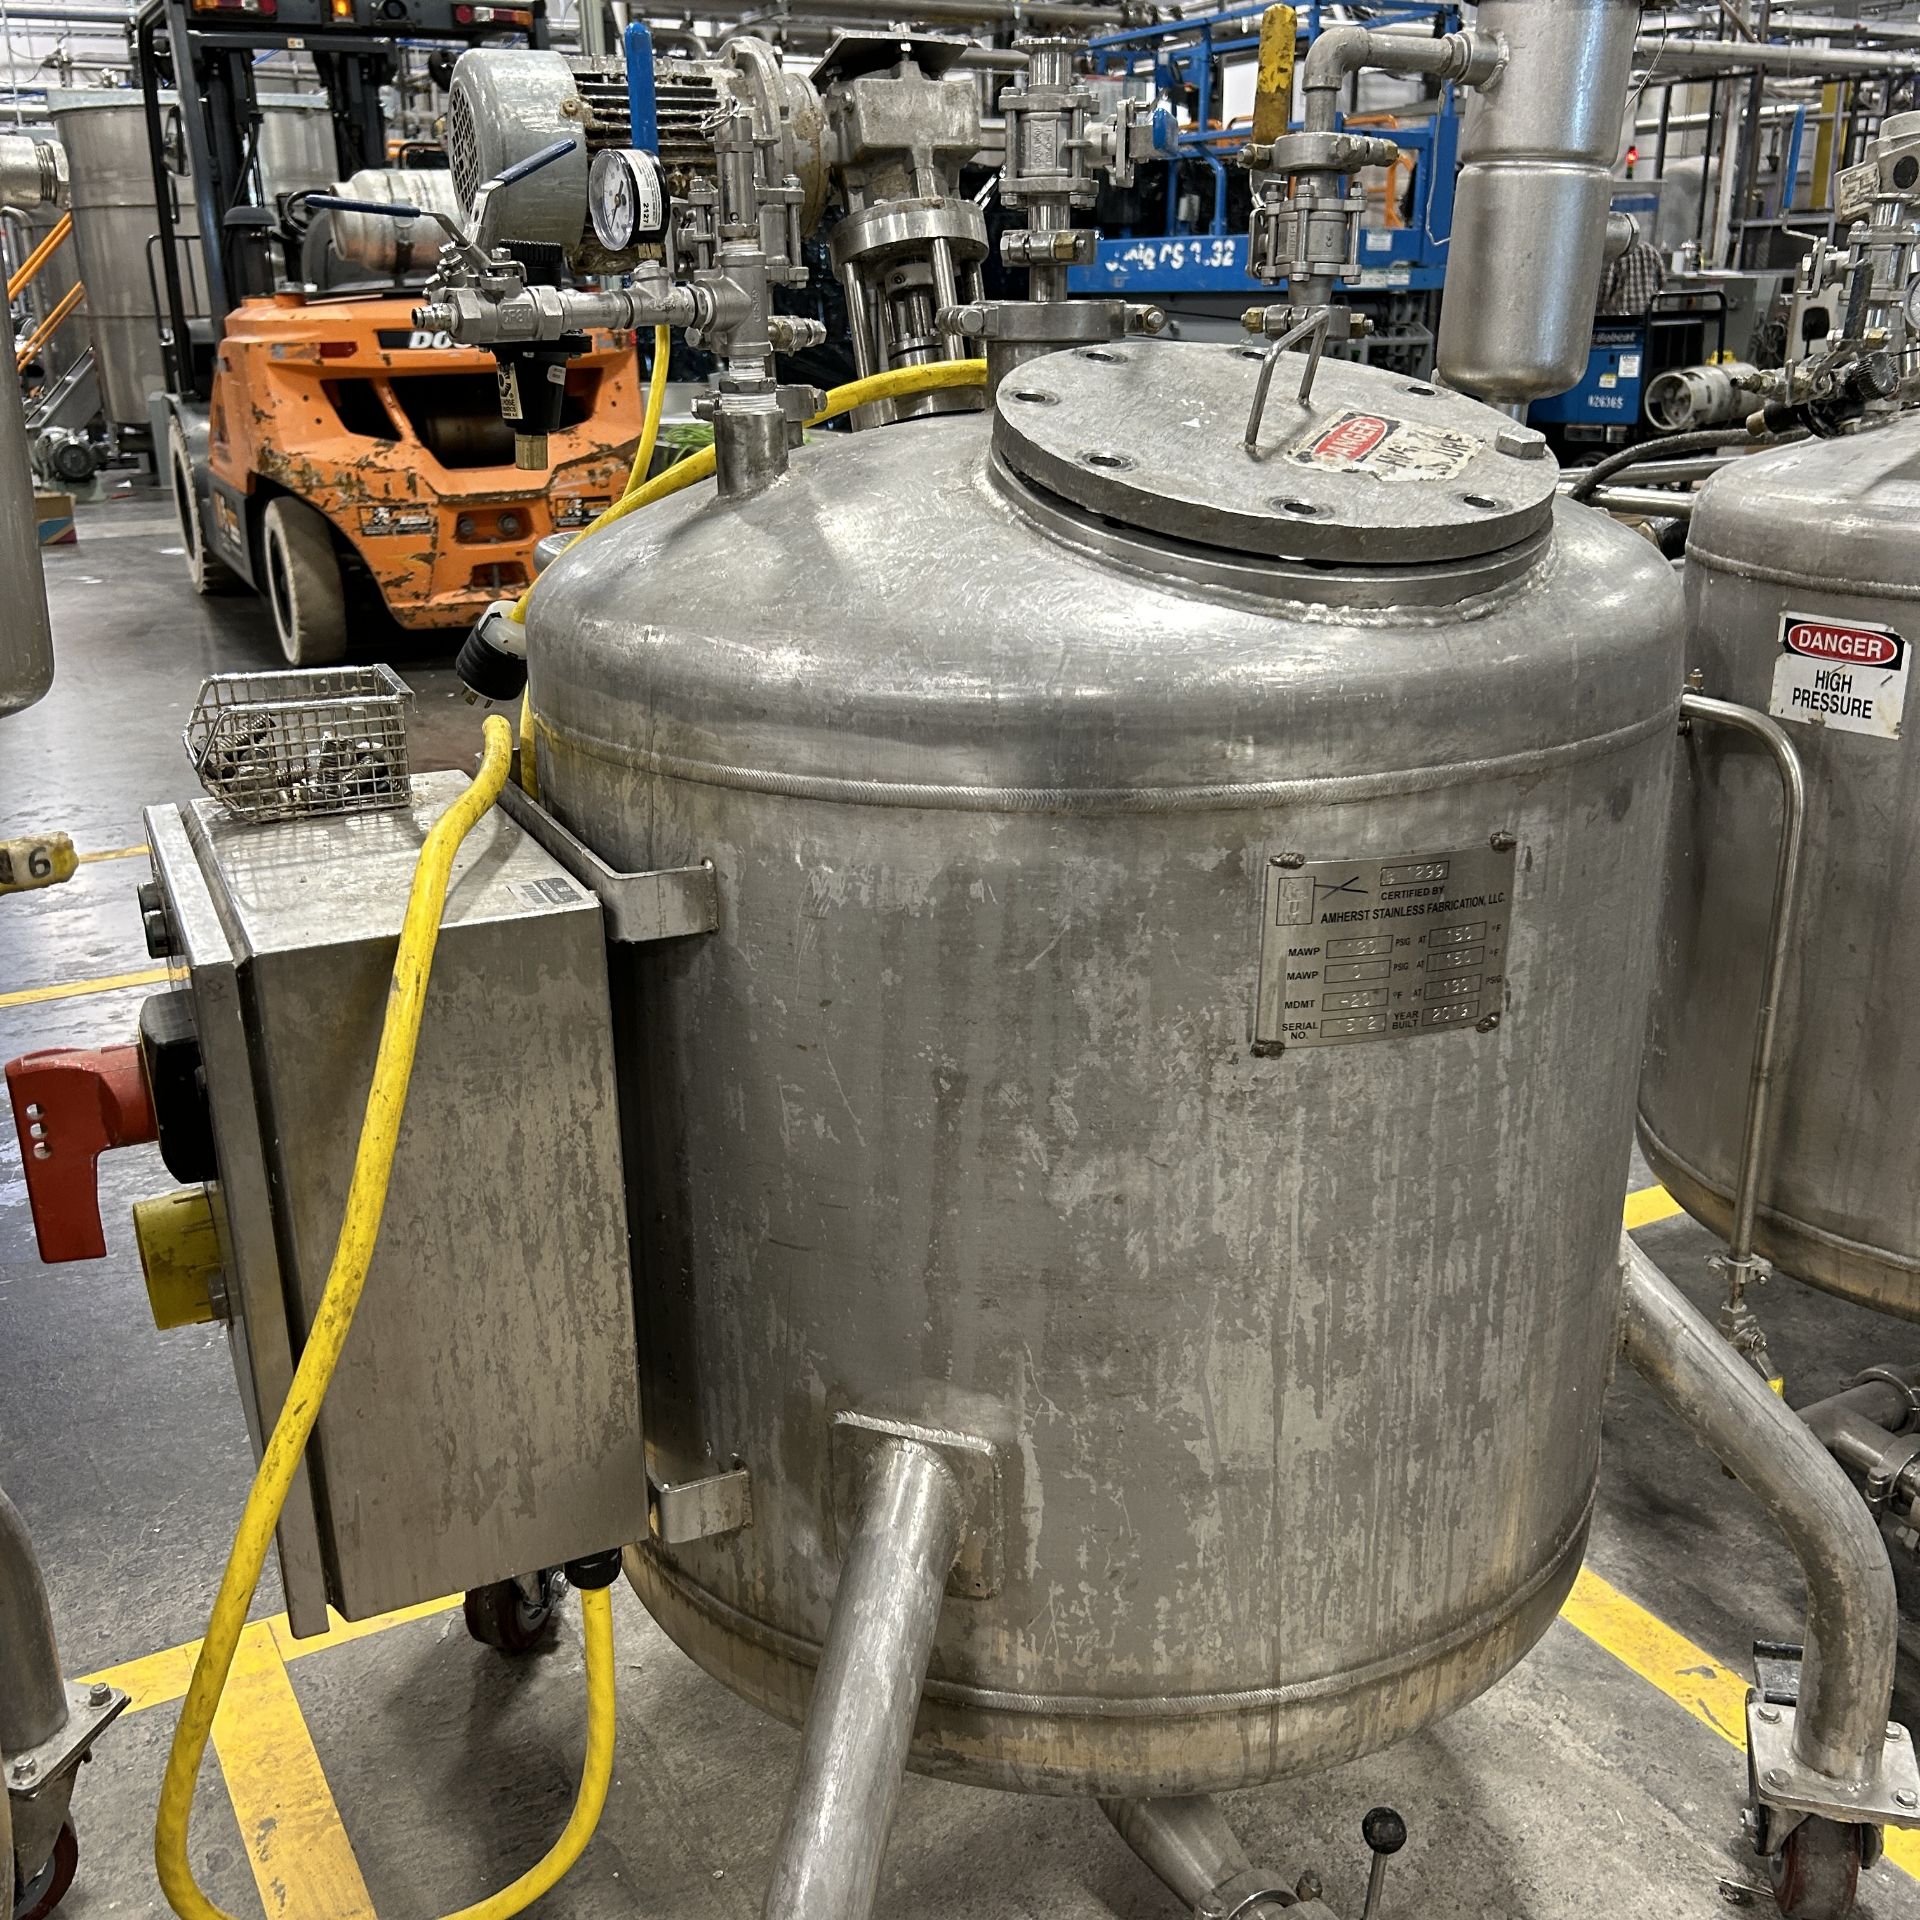 2019 Amherst Stainless Steel Agitation Pressure Pot - Image 3 of 8